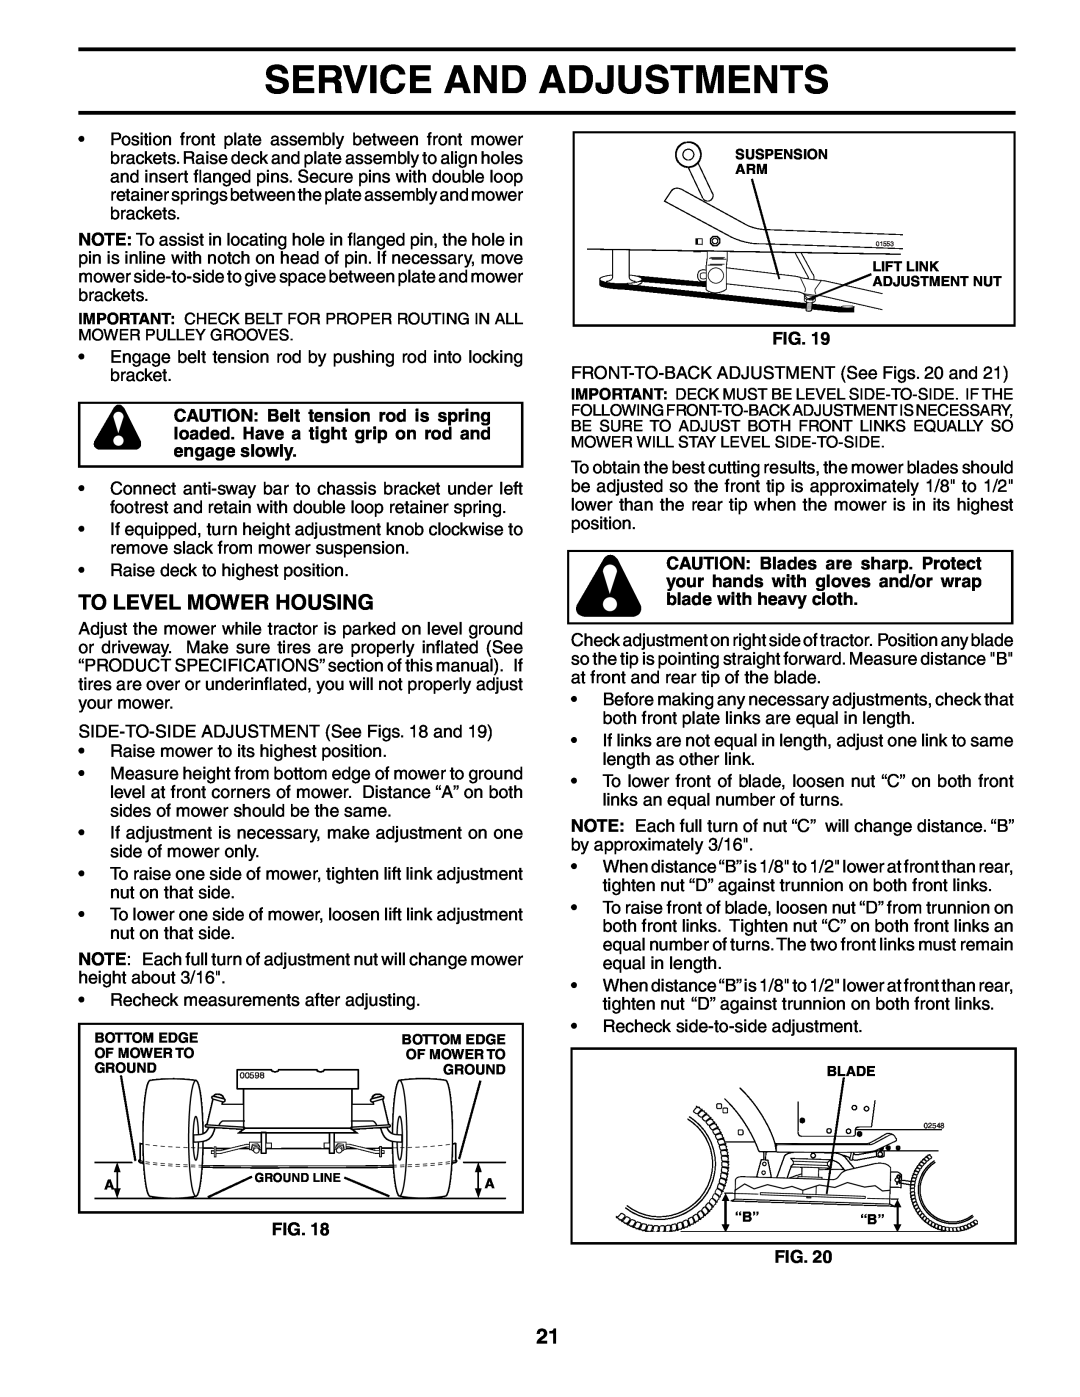 Poulan XT24H48YT manual To Level Mower Housing, Service And Adjustments, Ground Line 